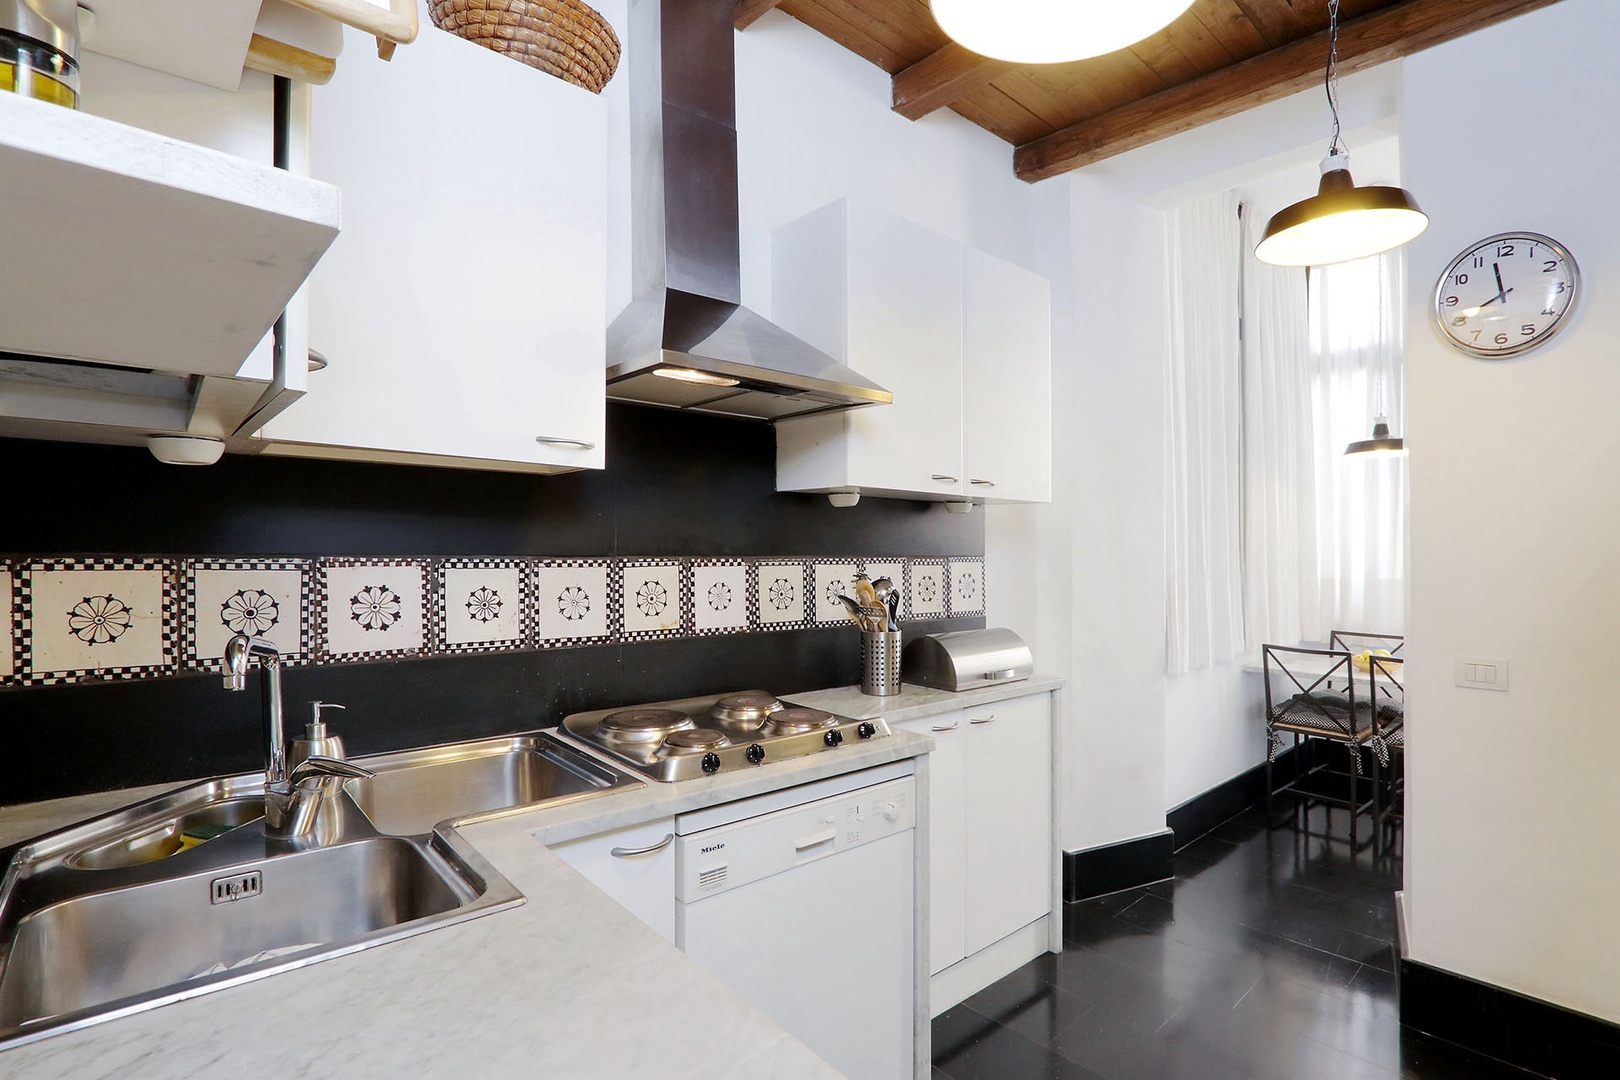 This full and separate kitchen will support simple or elaborate cooking.